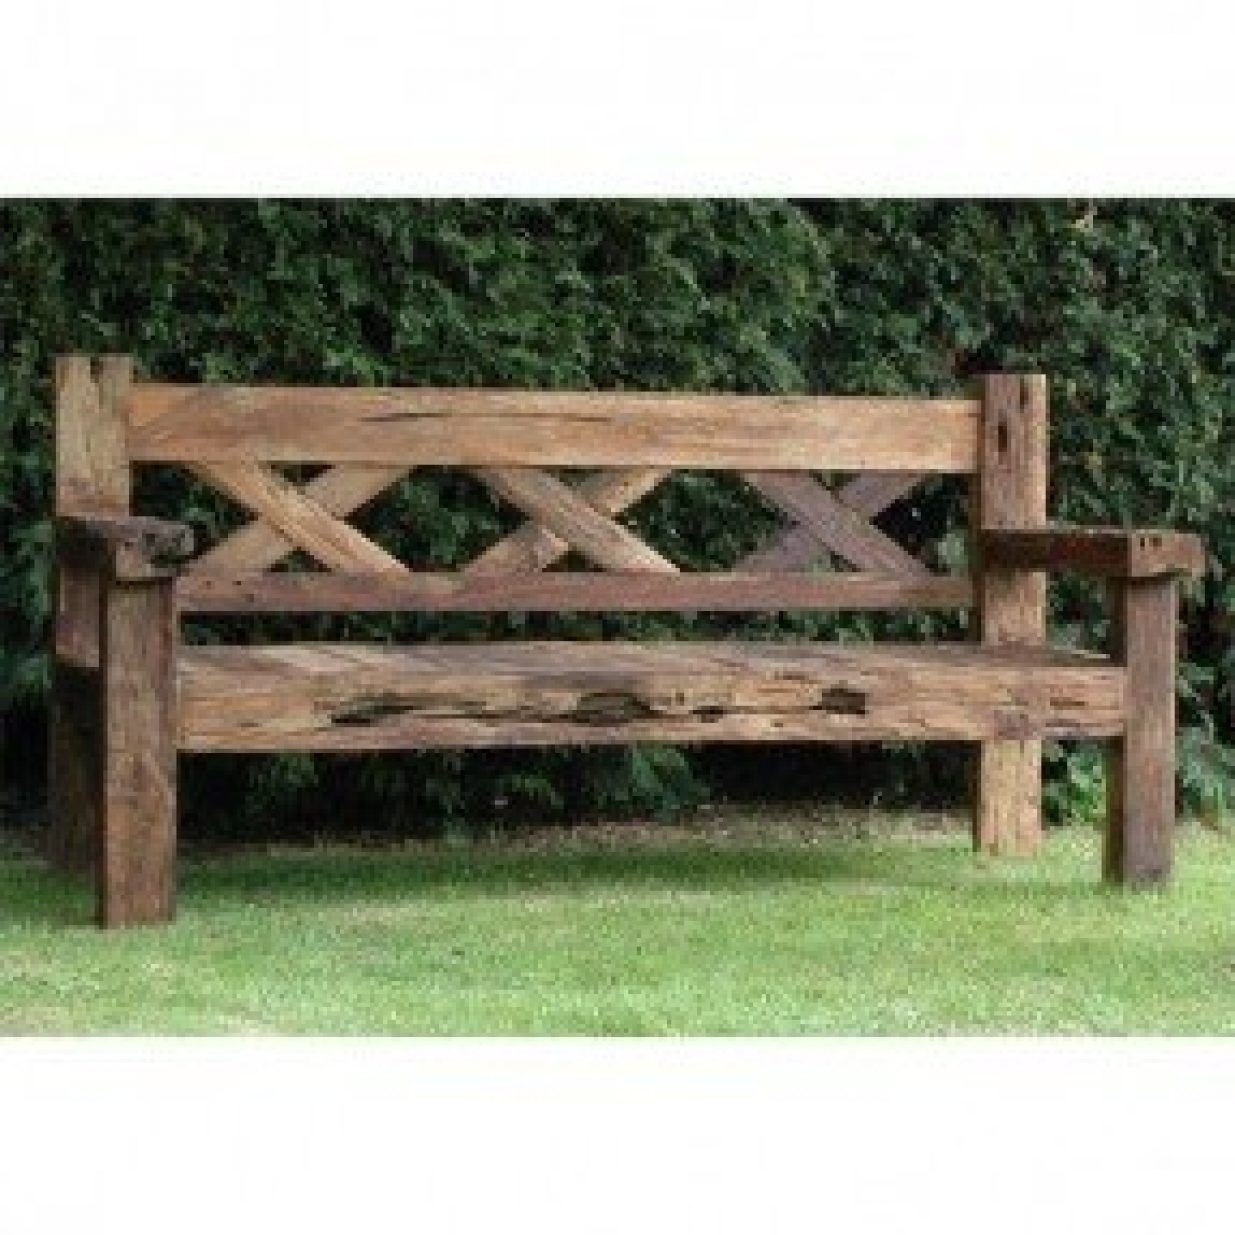 Rustic wooden benches